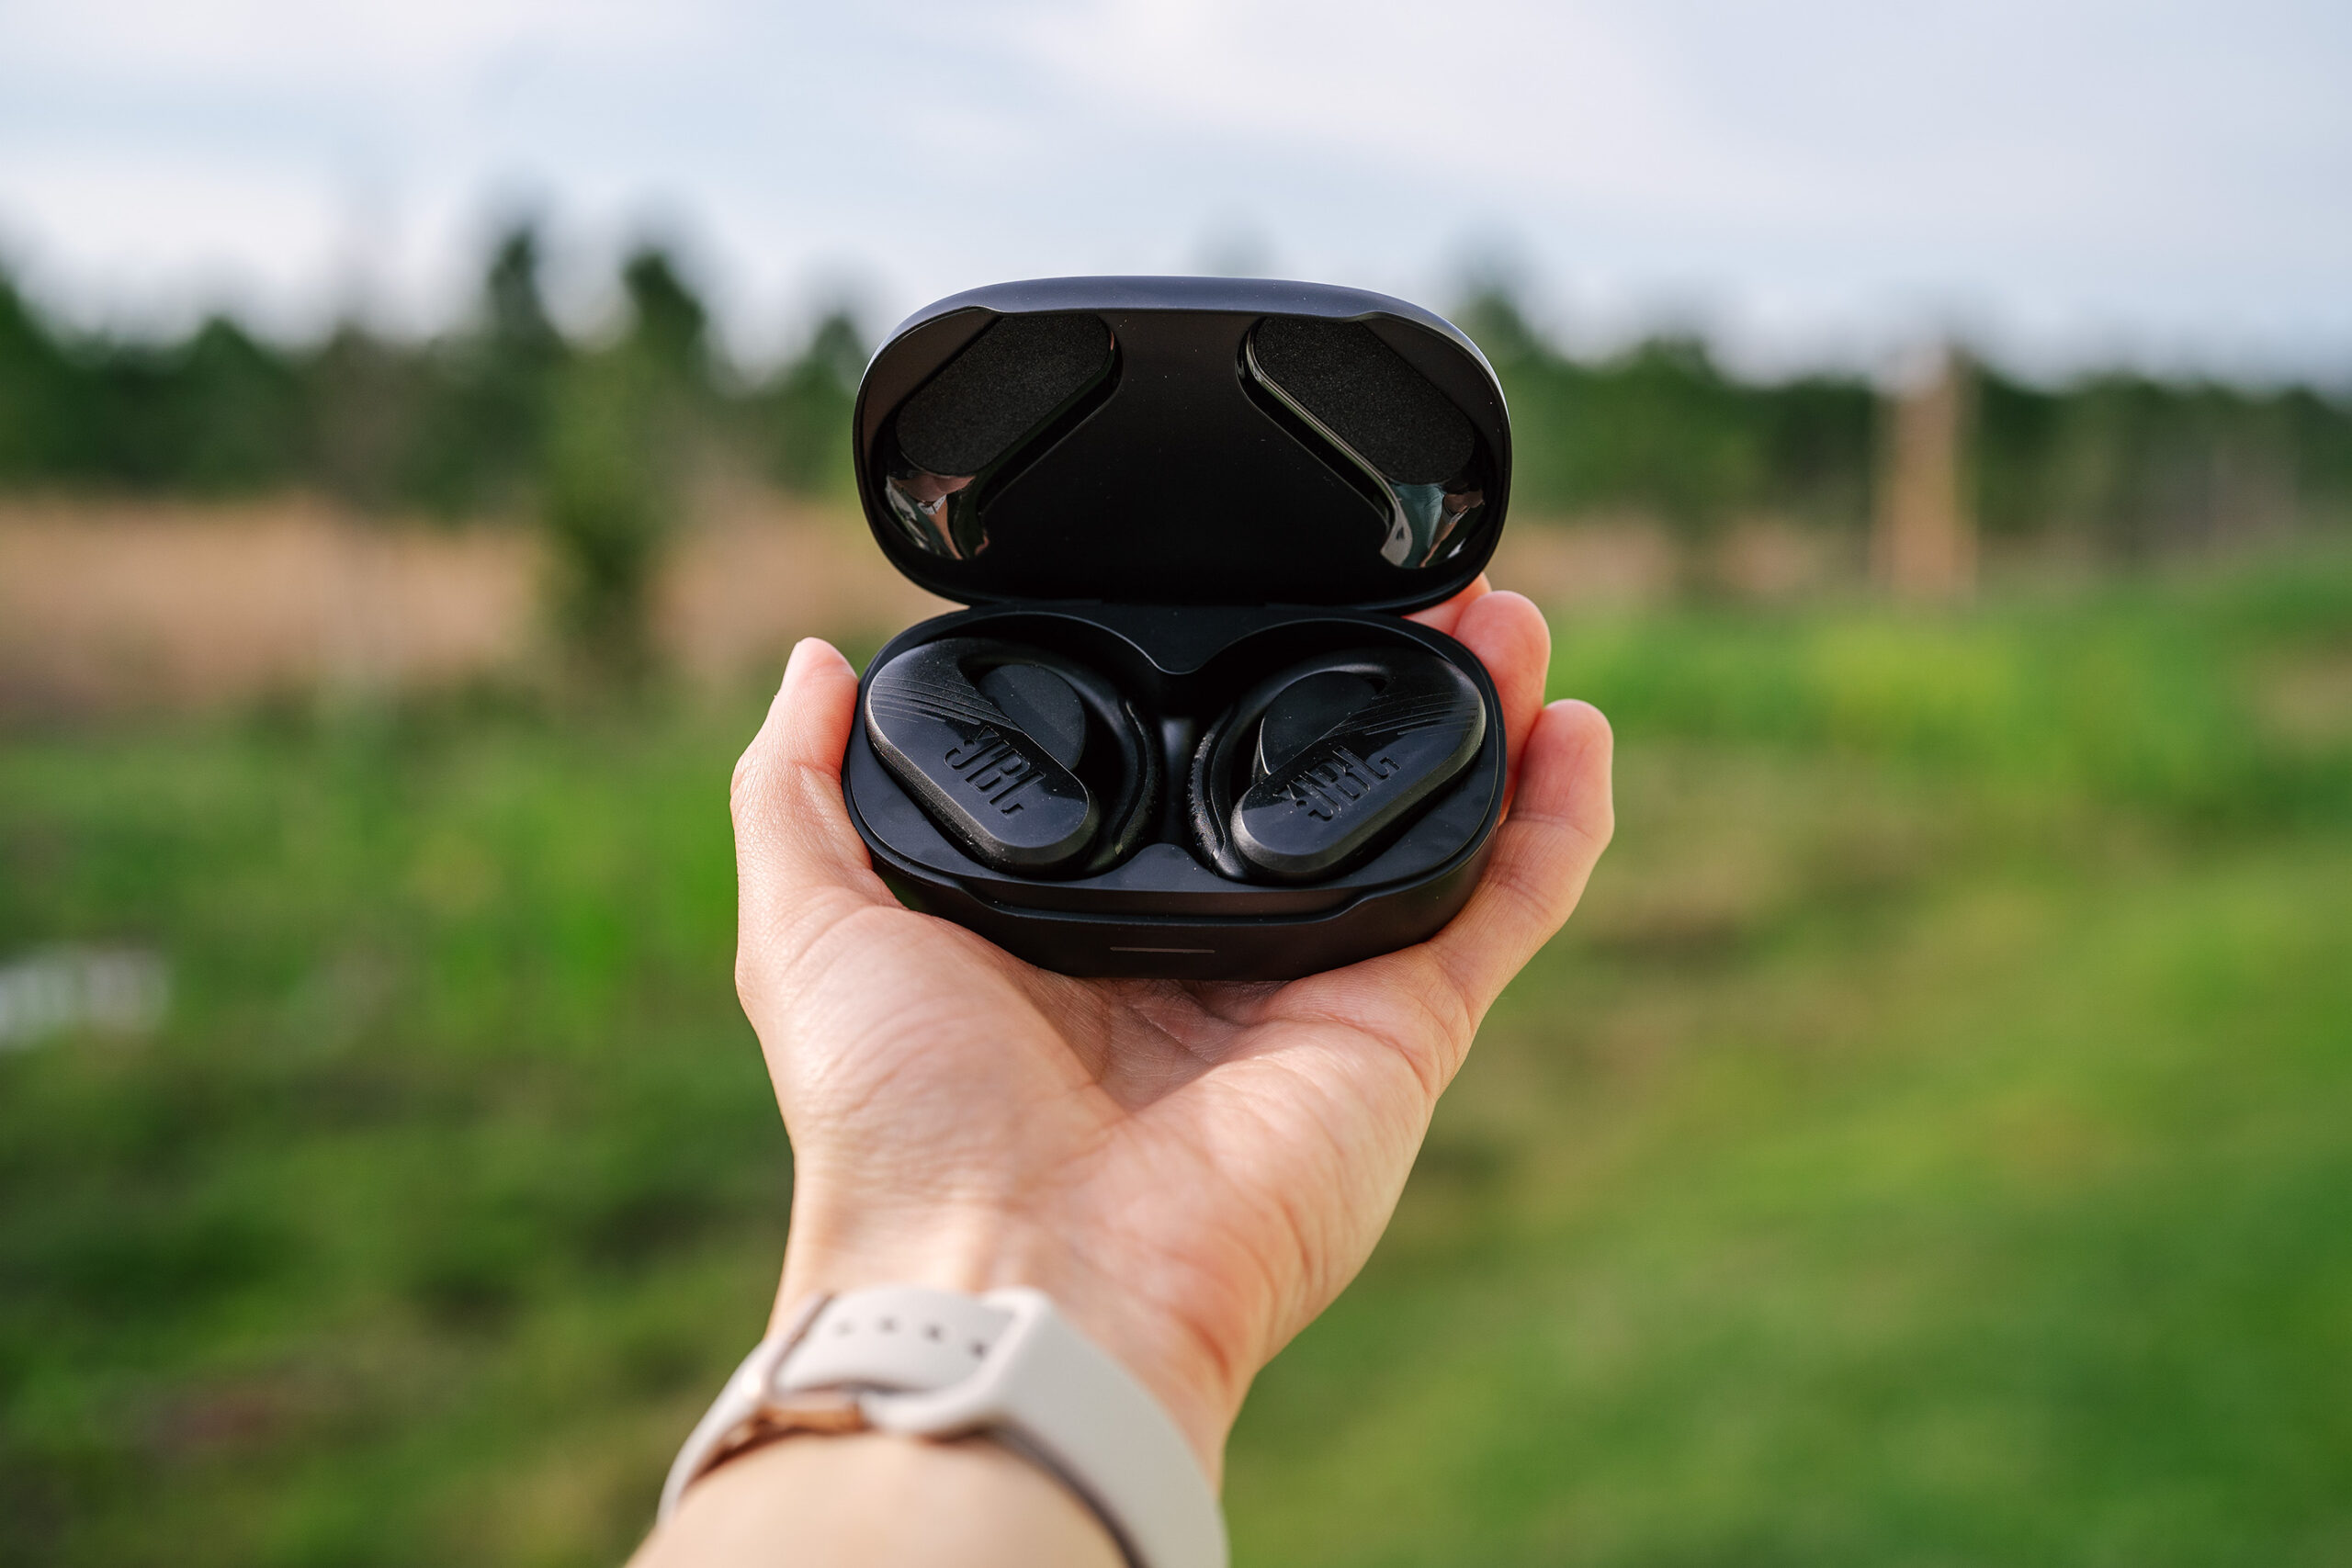 A person hold a pair of black JBL Endurance 3 headphones against a farm-like background.